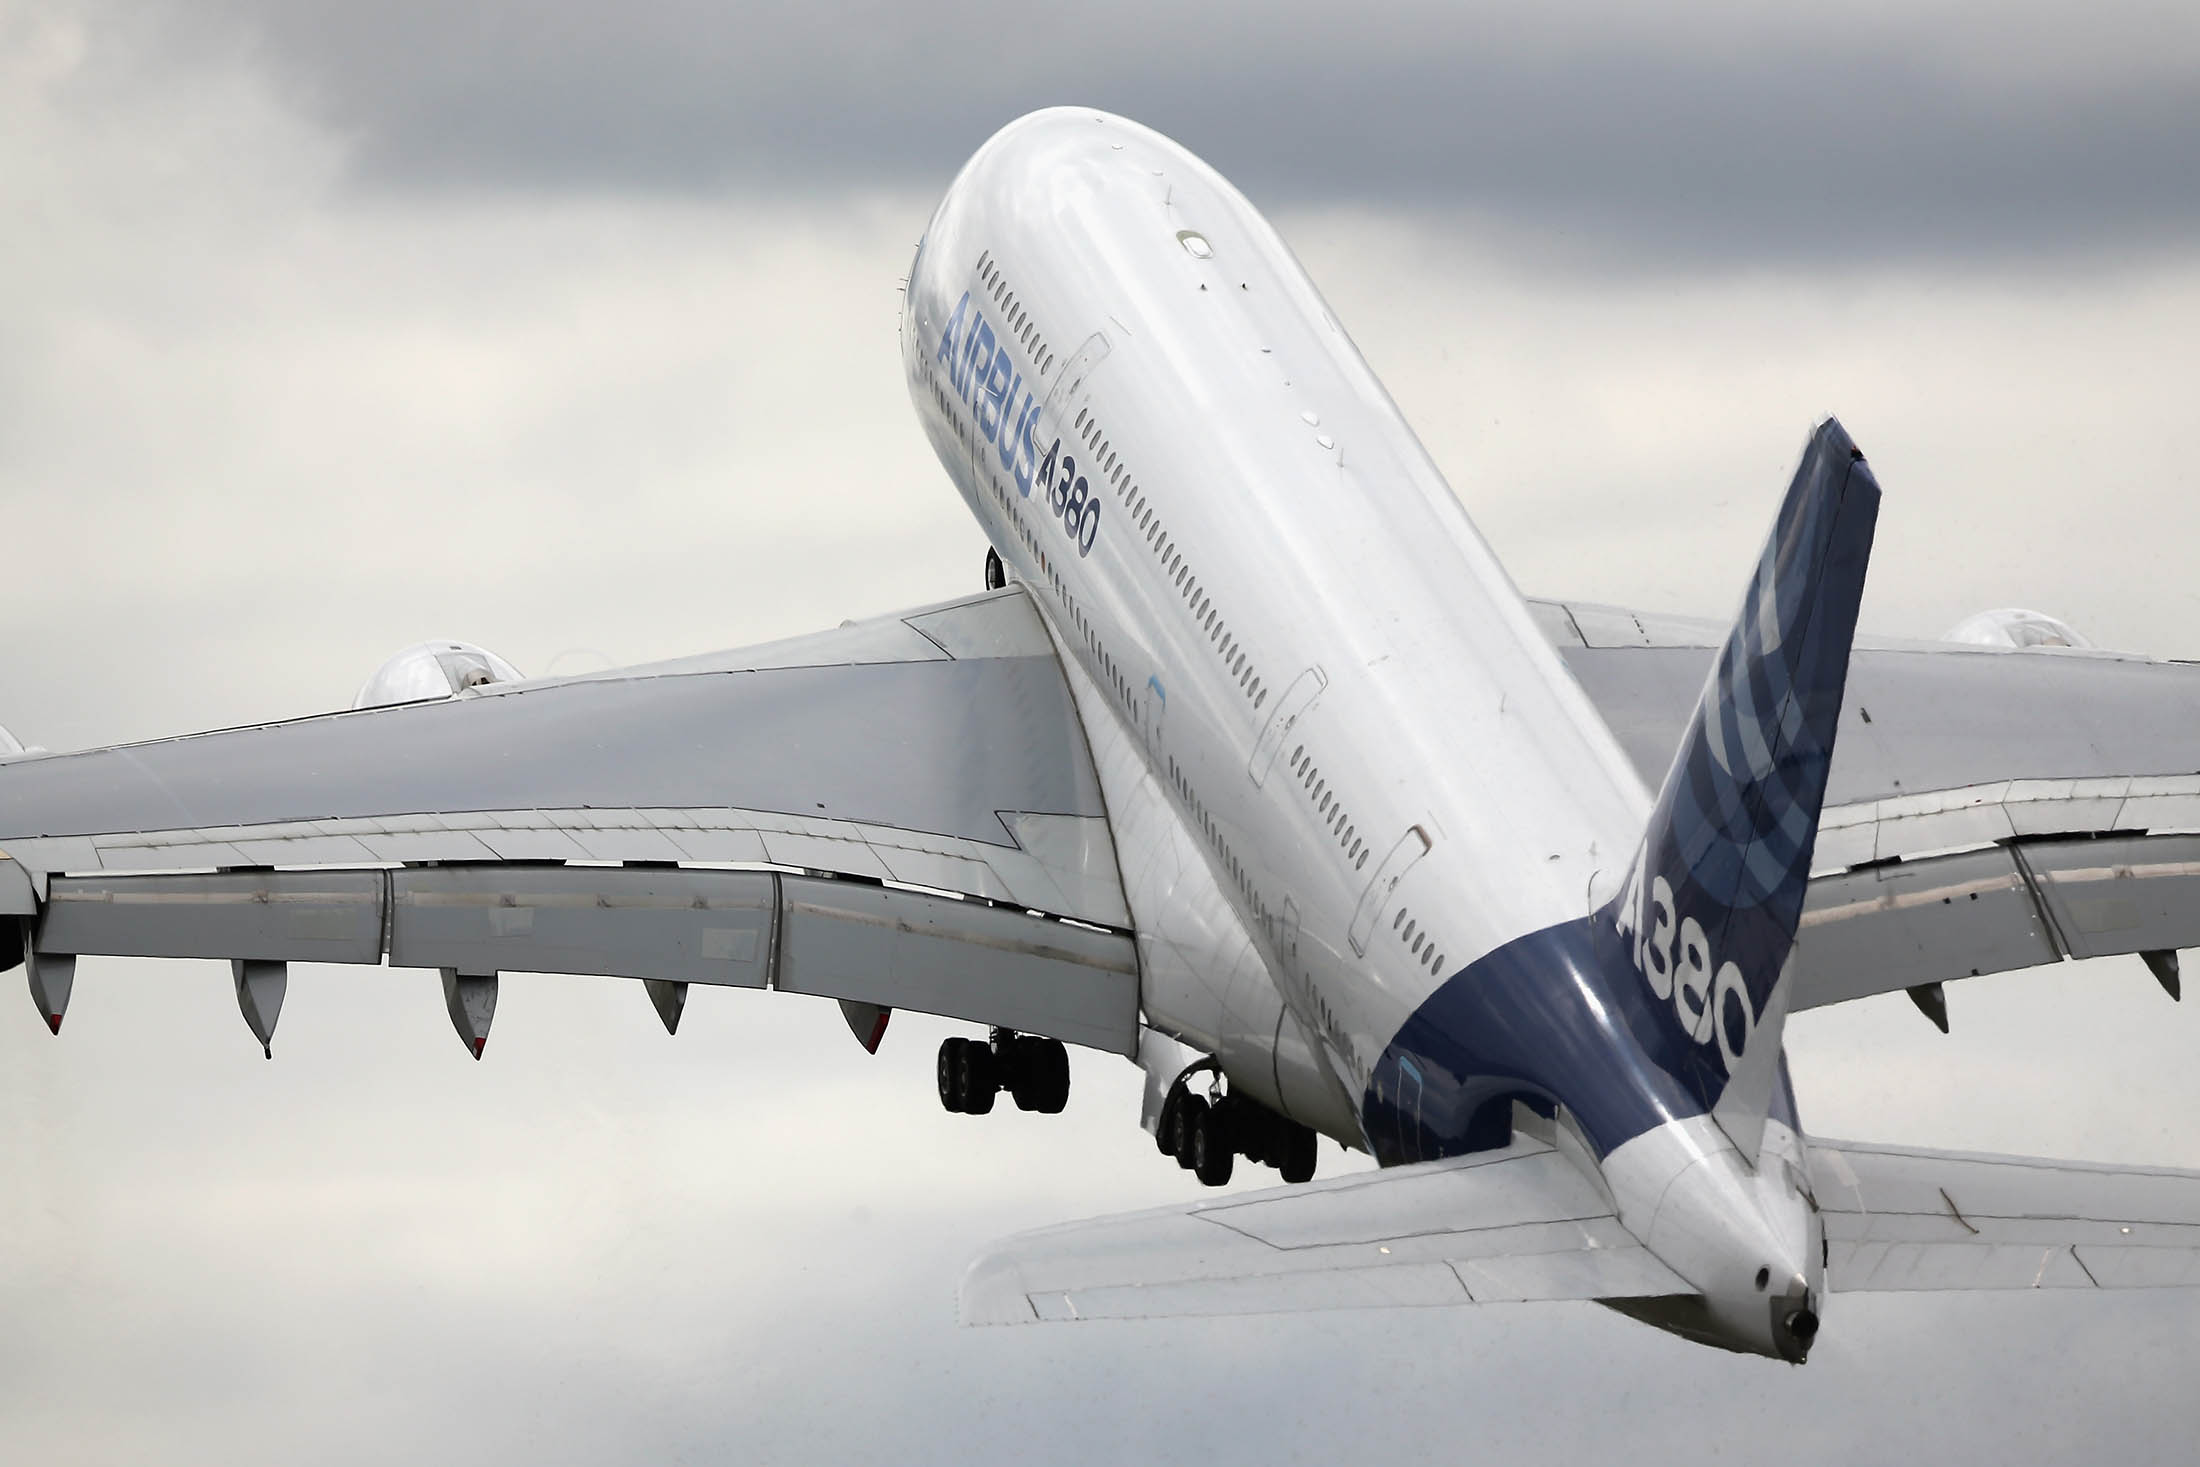 FARNBOROUGH, ENGLAND - JULY 16: A Boeing A380 performs in an aerial flying display on day four of the Farnborough International Airshow on July 16, 2014 in Farnborough, England. The Farnborough International Airshow is the biggest event of it's kind attracting people from all over the world.
